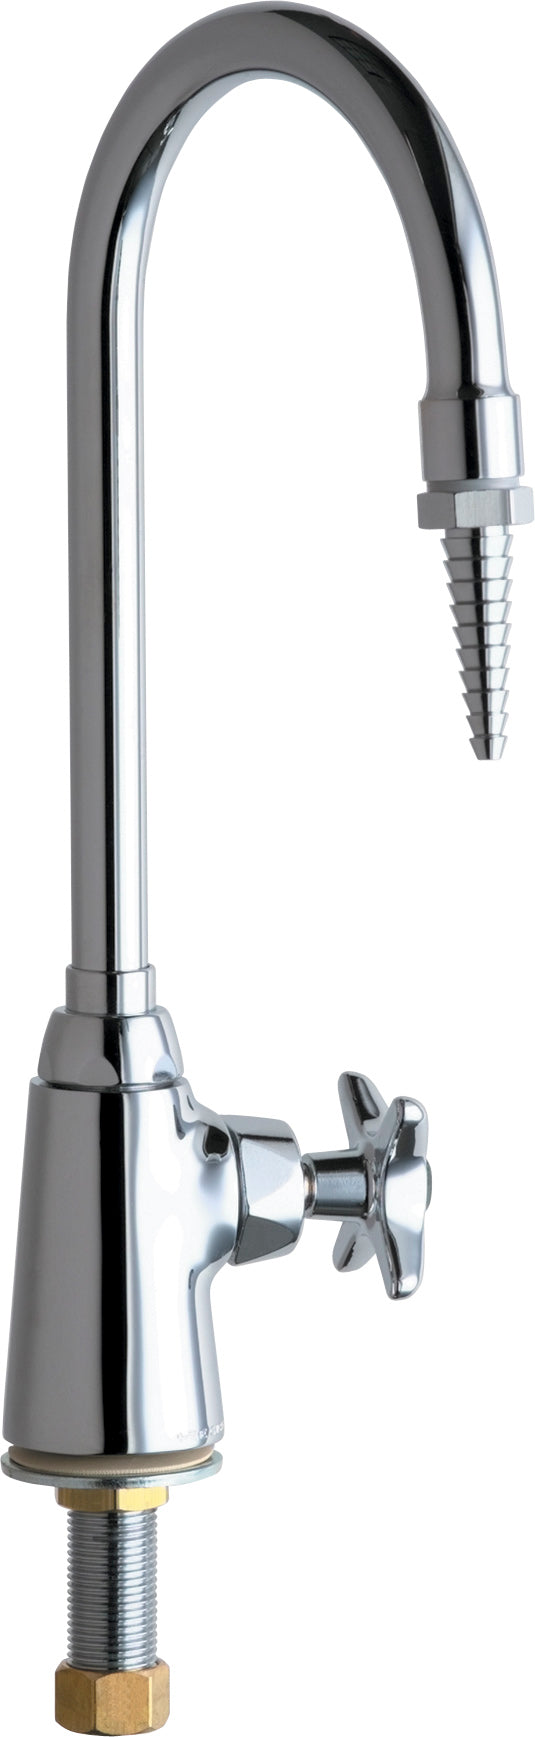 Chicago Faucets Laboratory Sink Faucet 927-HWCP